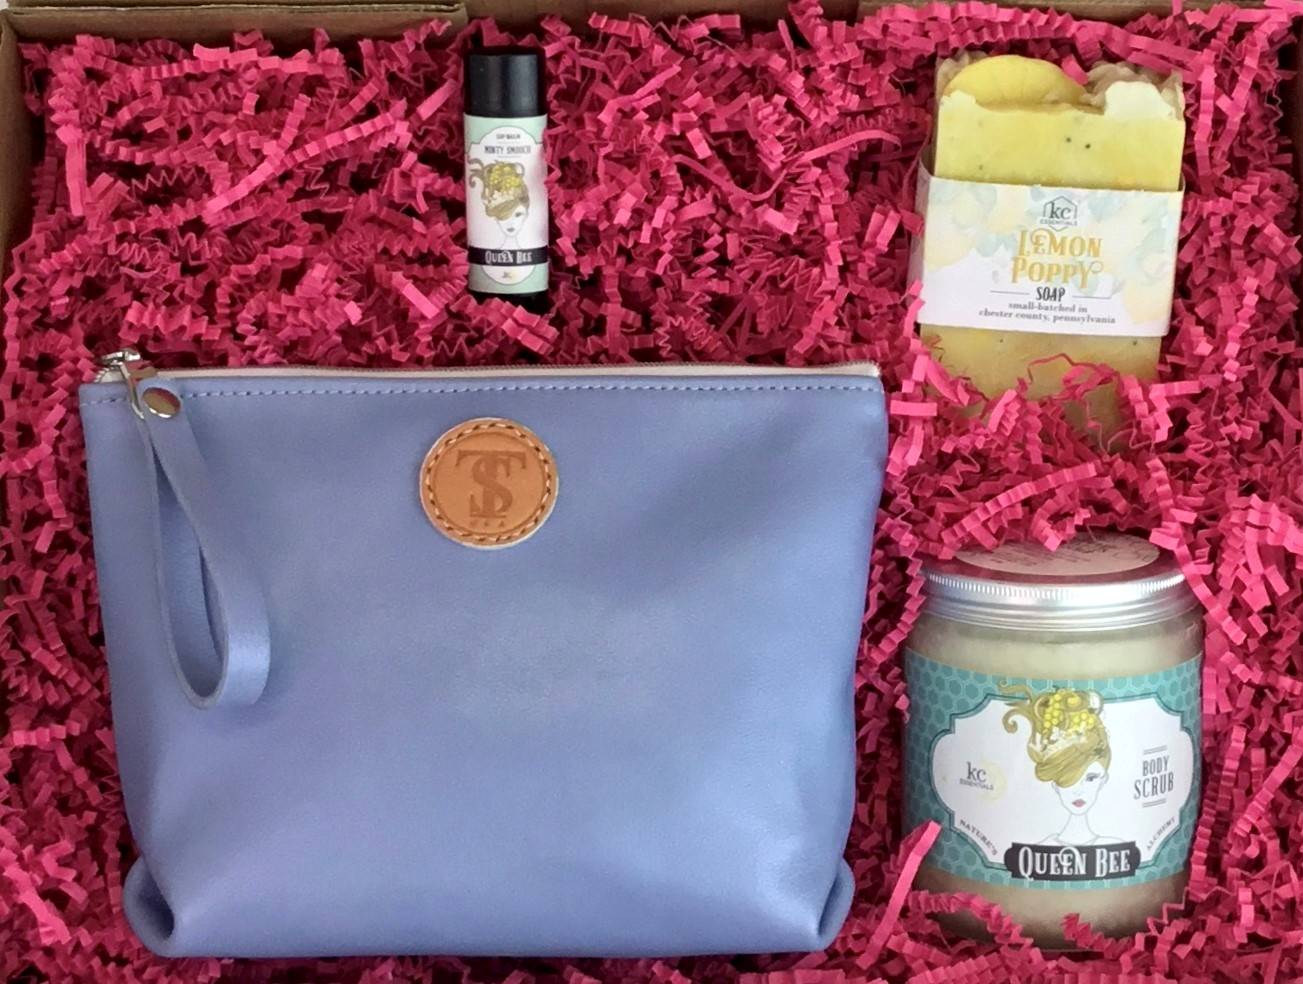 Town &amp; Shore Handcrafted Serenity Gift set featuring T5 Leather bath kit and brush bag shown in light periwinkle blue calfskin leather. KC Essentials artisan made vegan bar soap, essential oils body scrub and soothing lip balm. Arranged in gift box with sustainable eco-friendly bright pink crinkle paper.